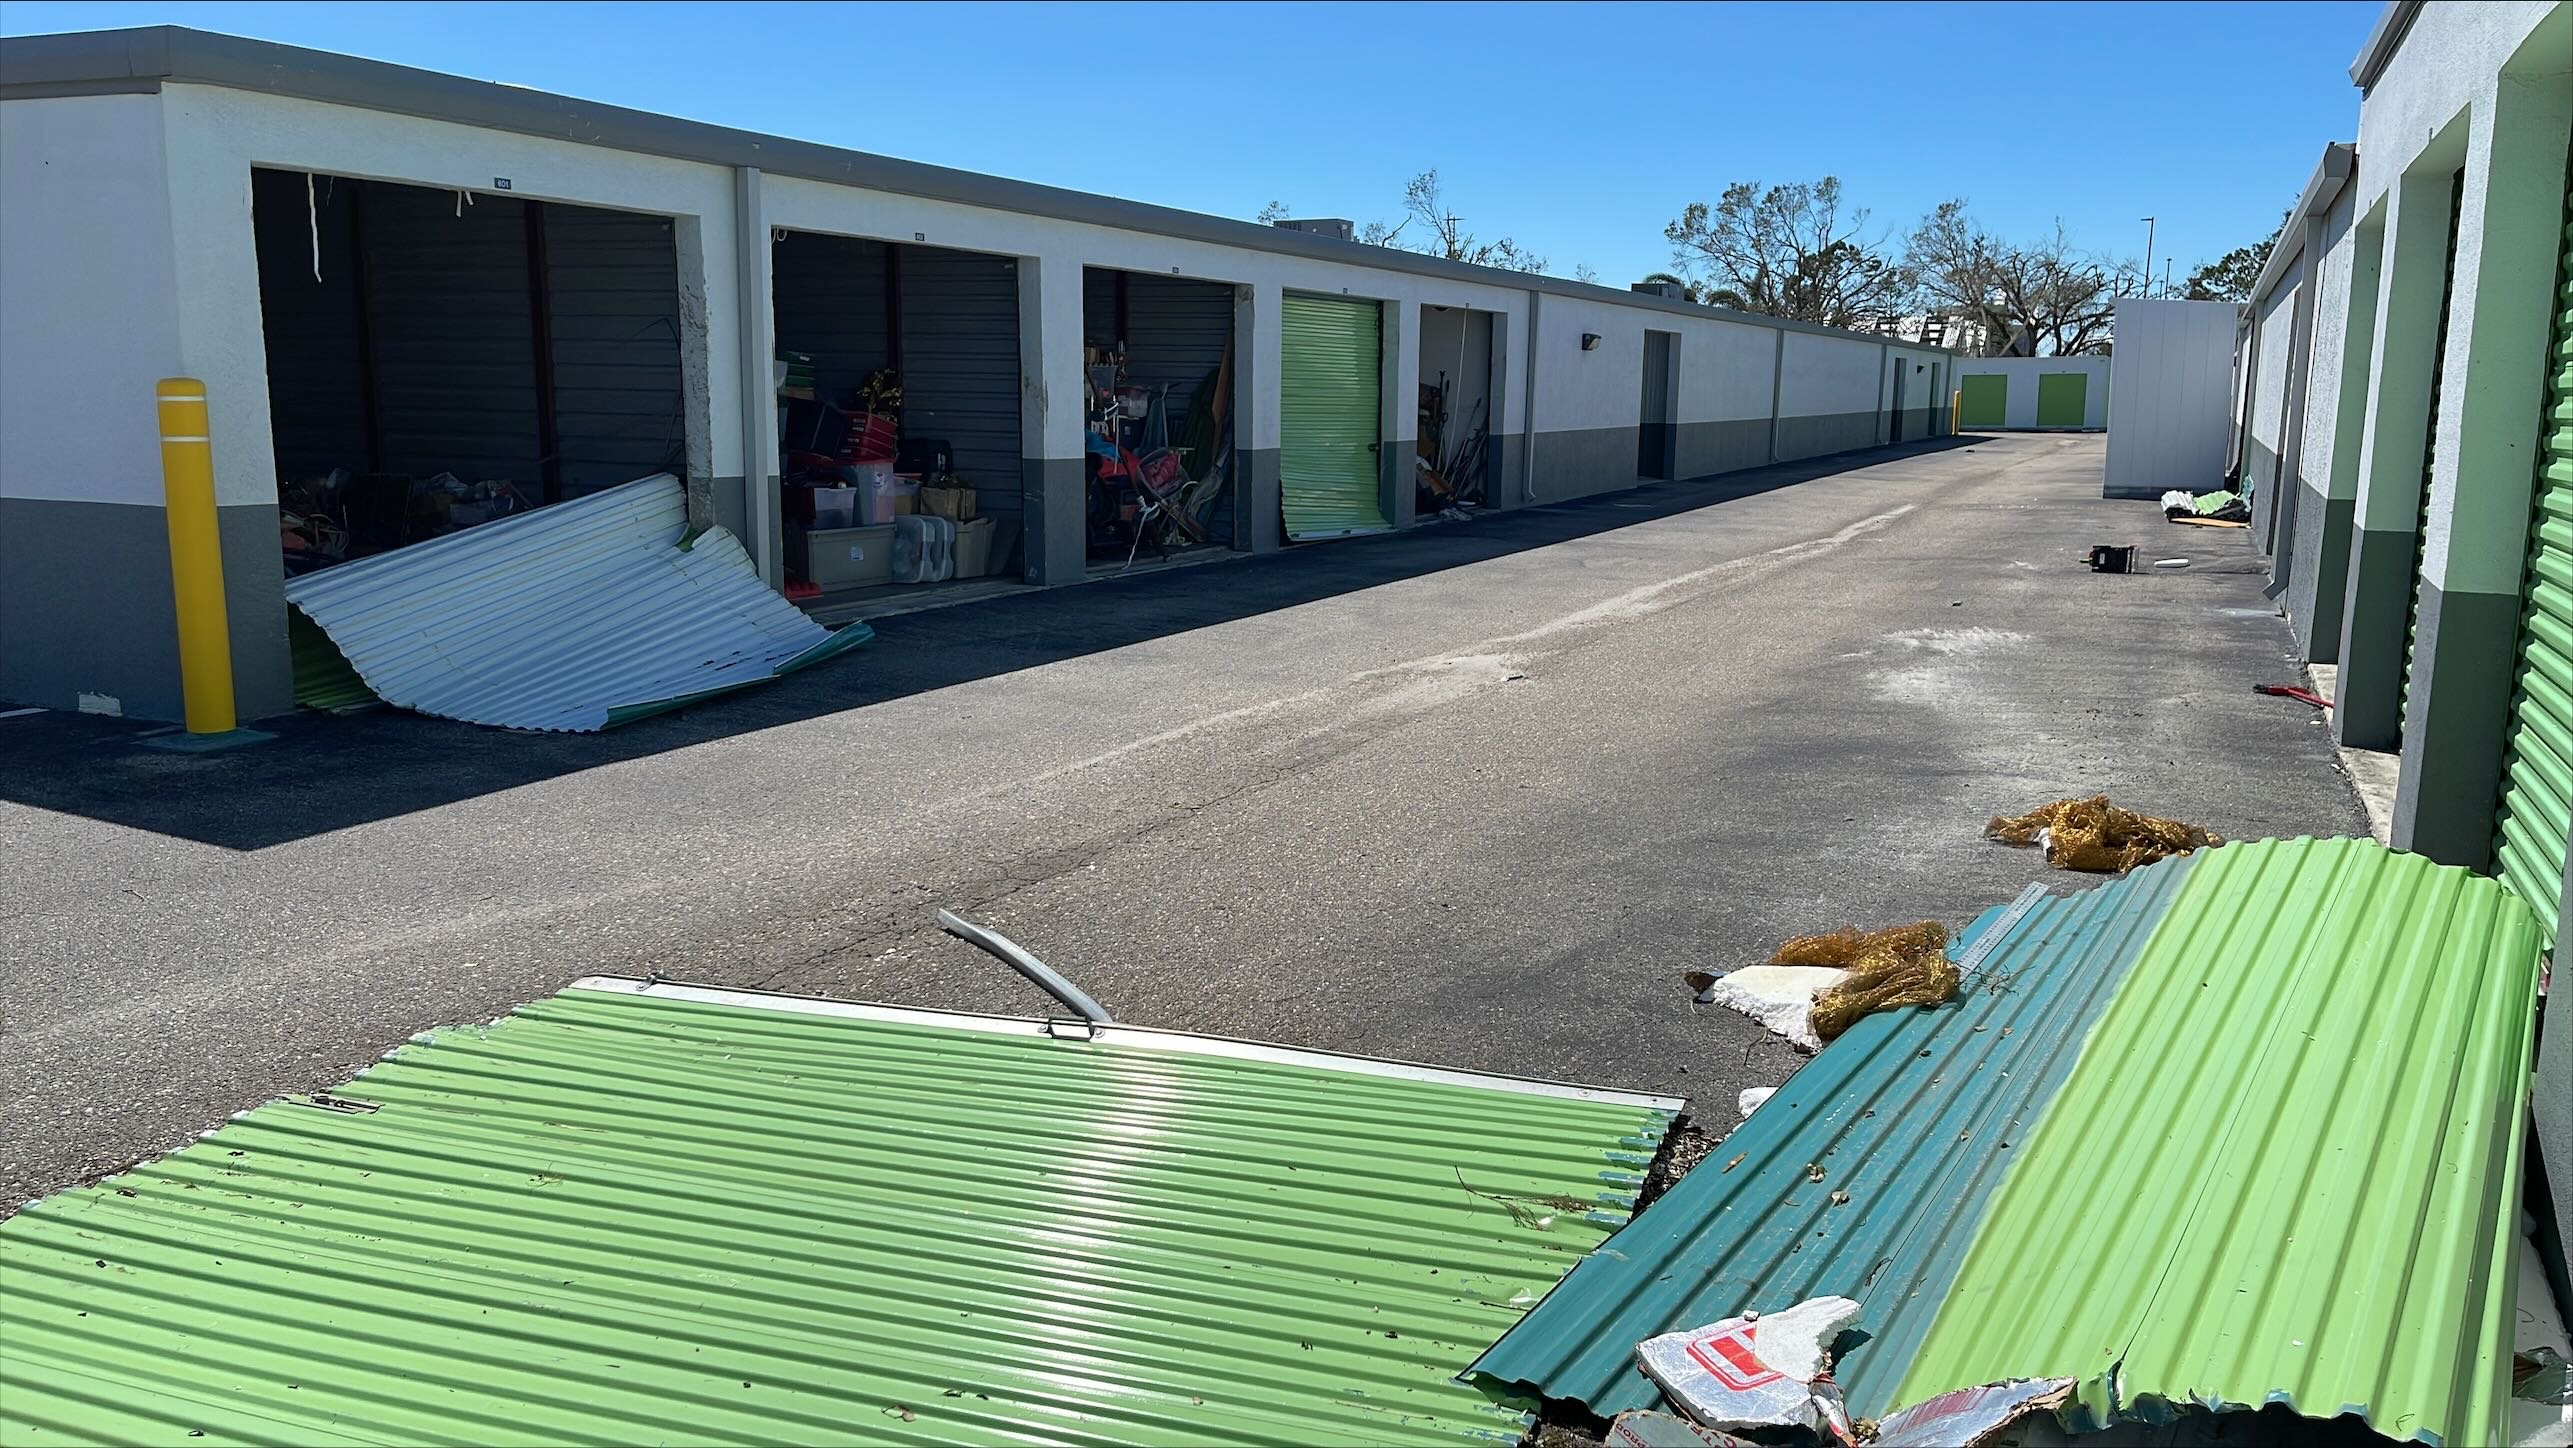 Outdoor Extra Space storage sheds affected by Hurricane Ian